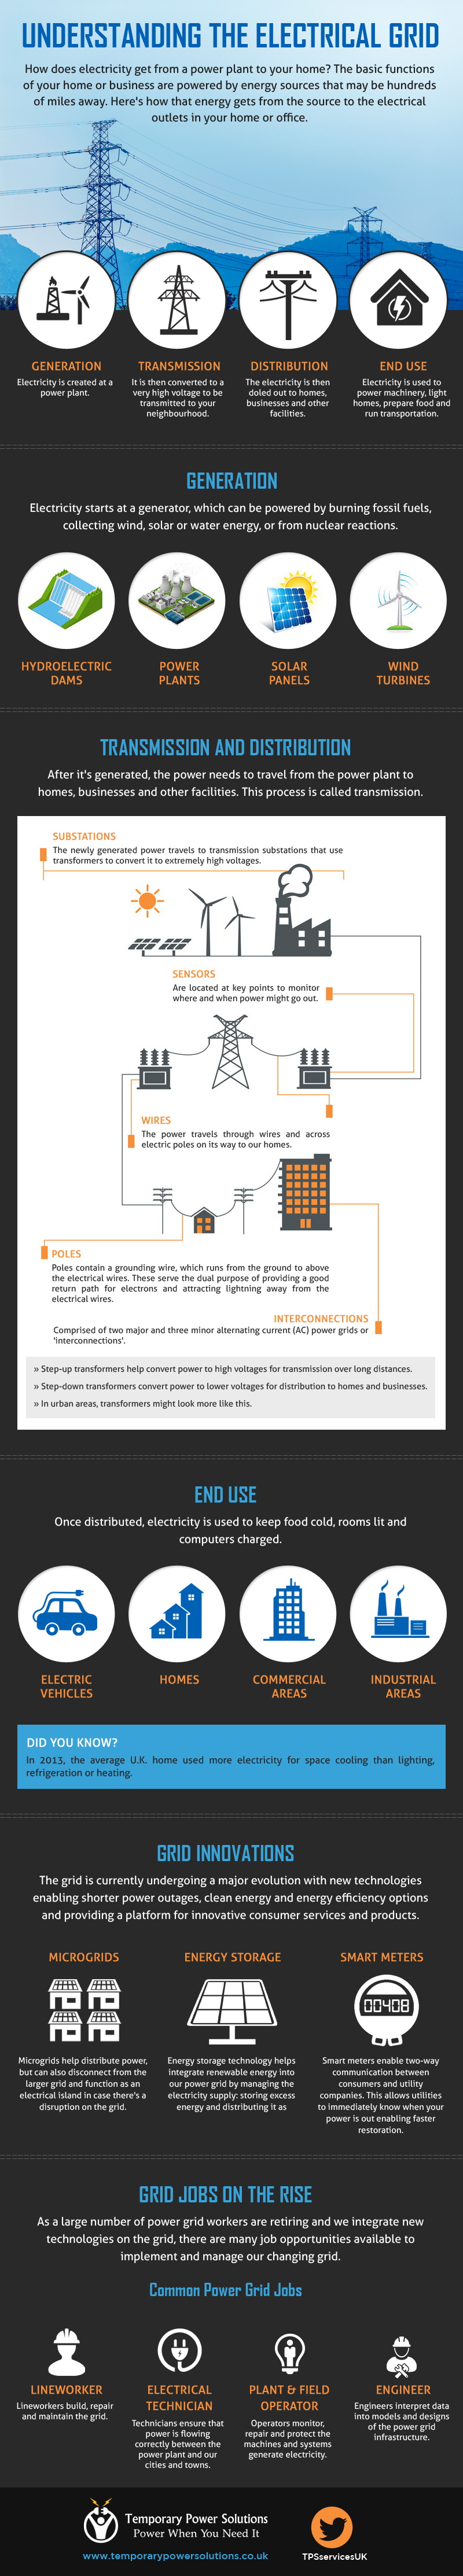 Understanding the Electrical Grid